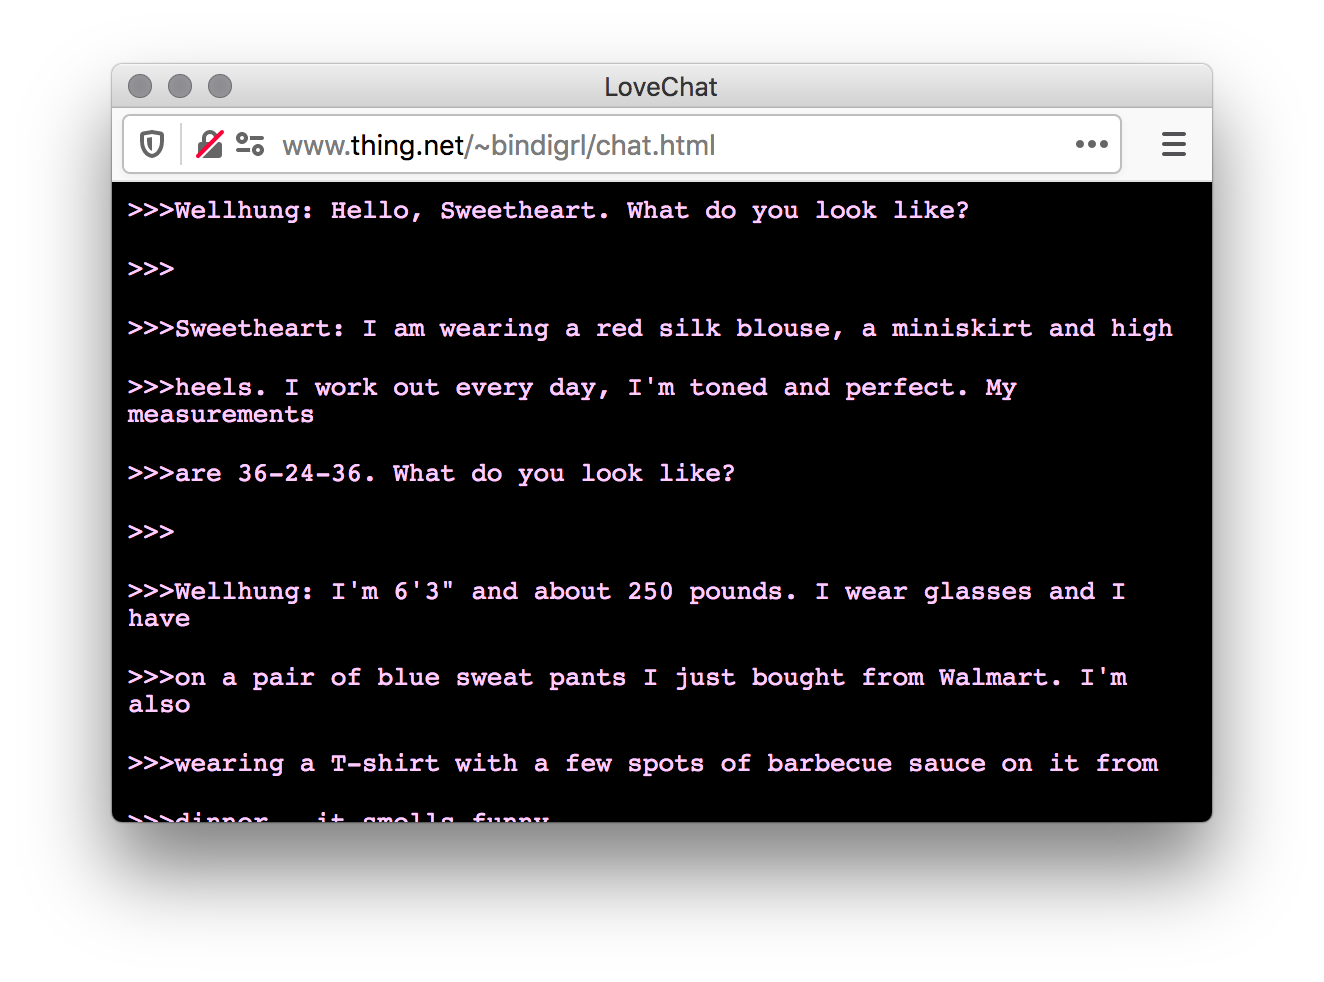 Screenshot of a black webpage showing a conversation of pink text between the usernames "Wellhung" and "Sweetheart" asking and describing to each other what they look like.